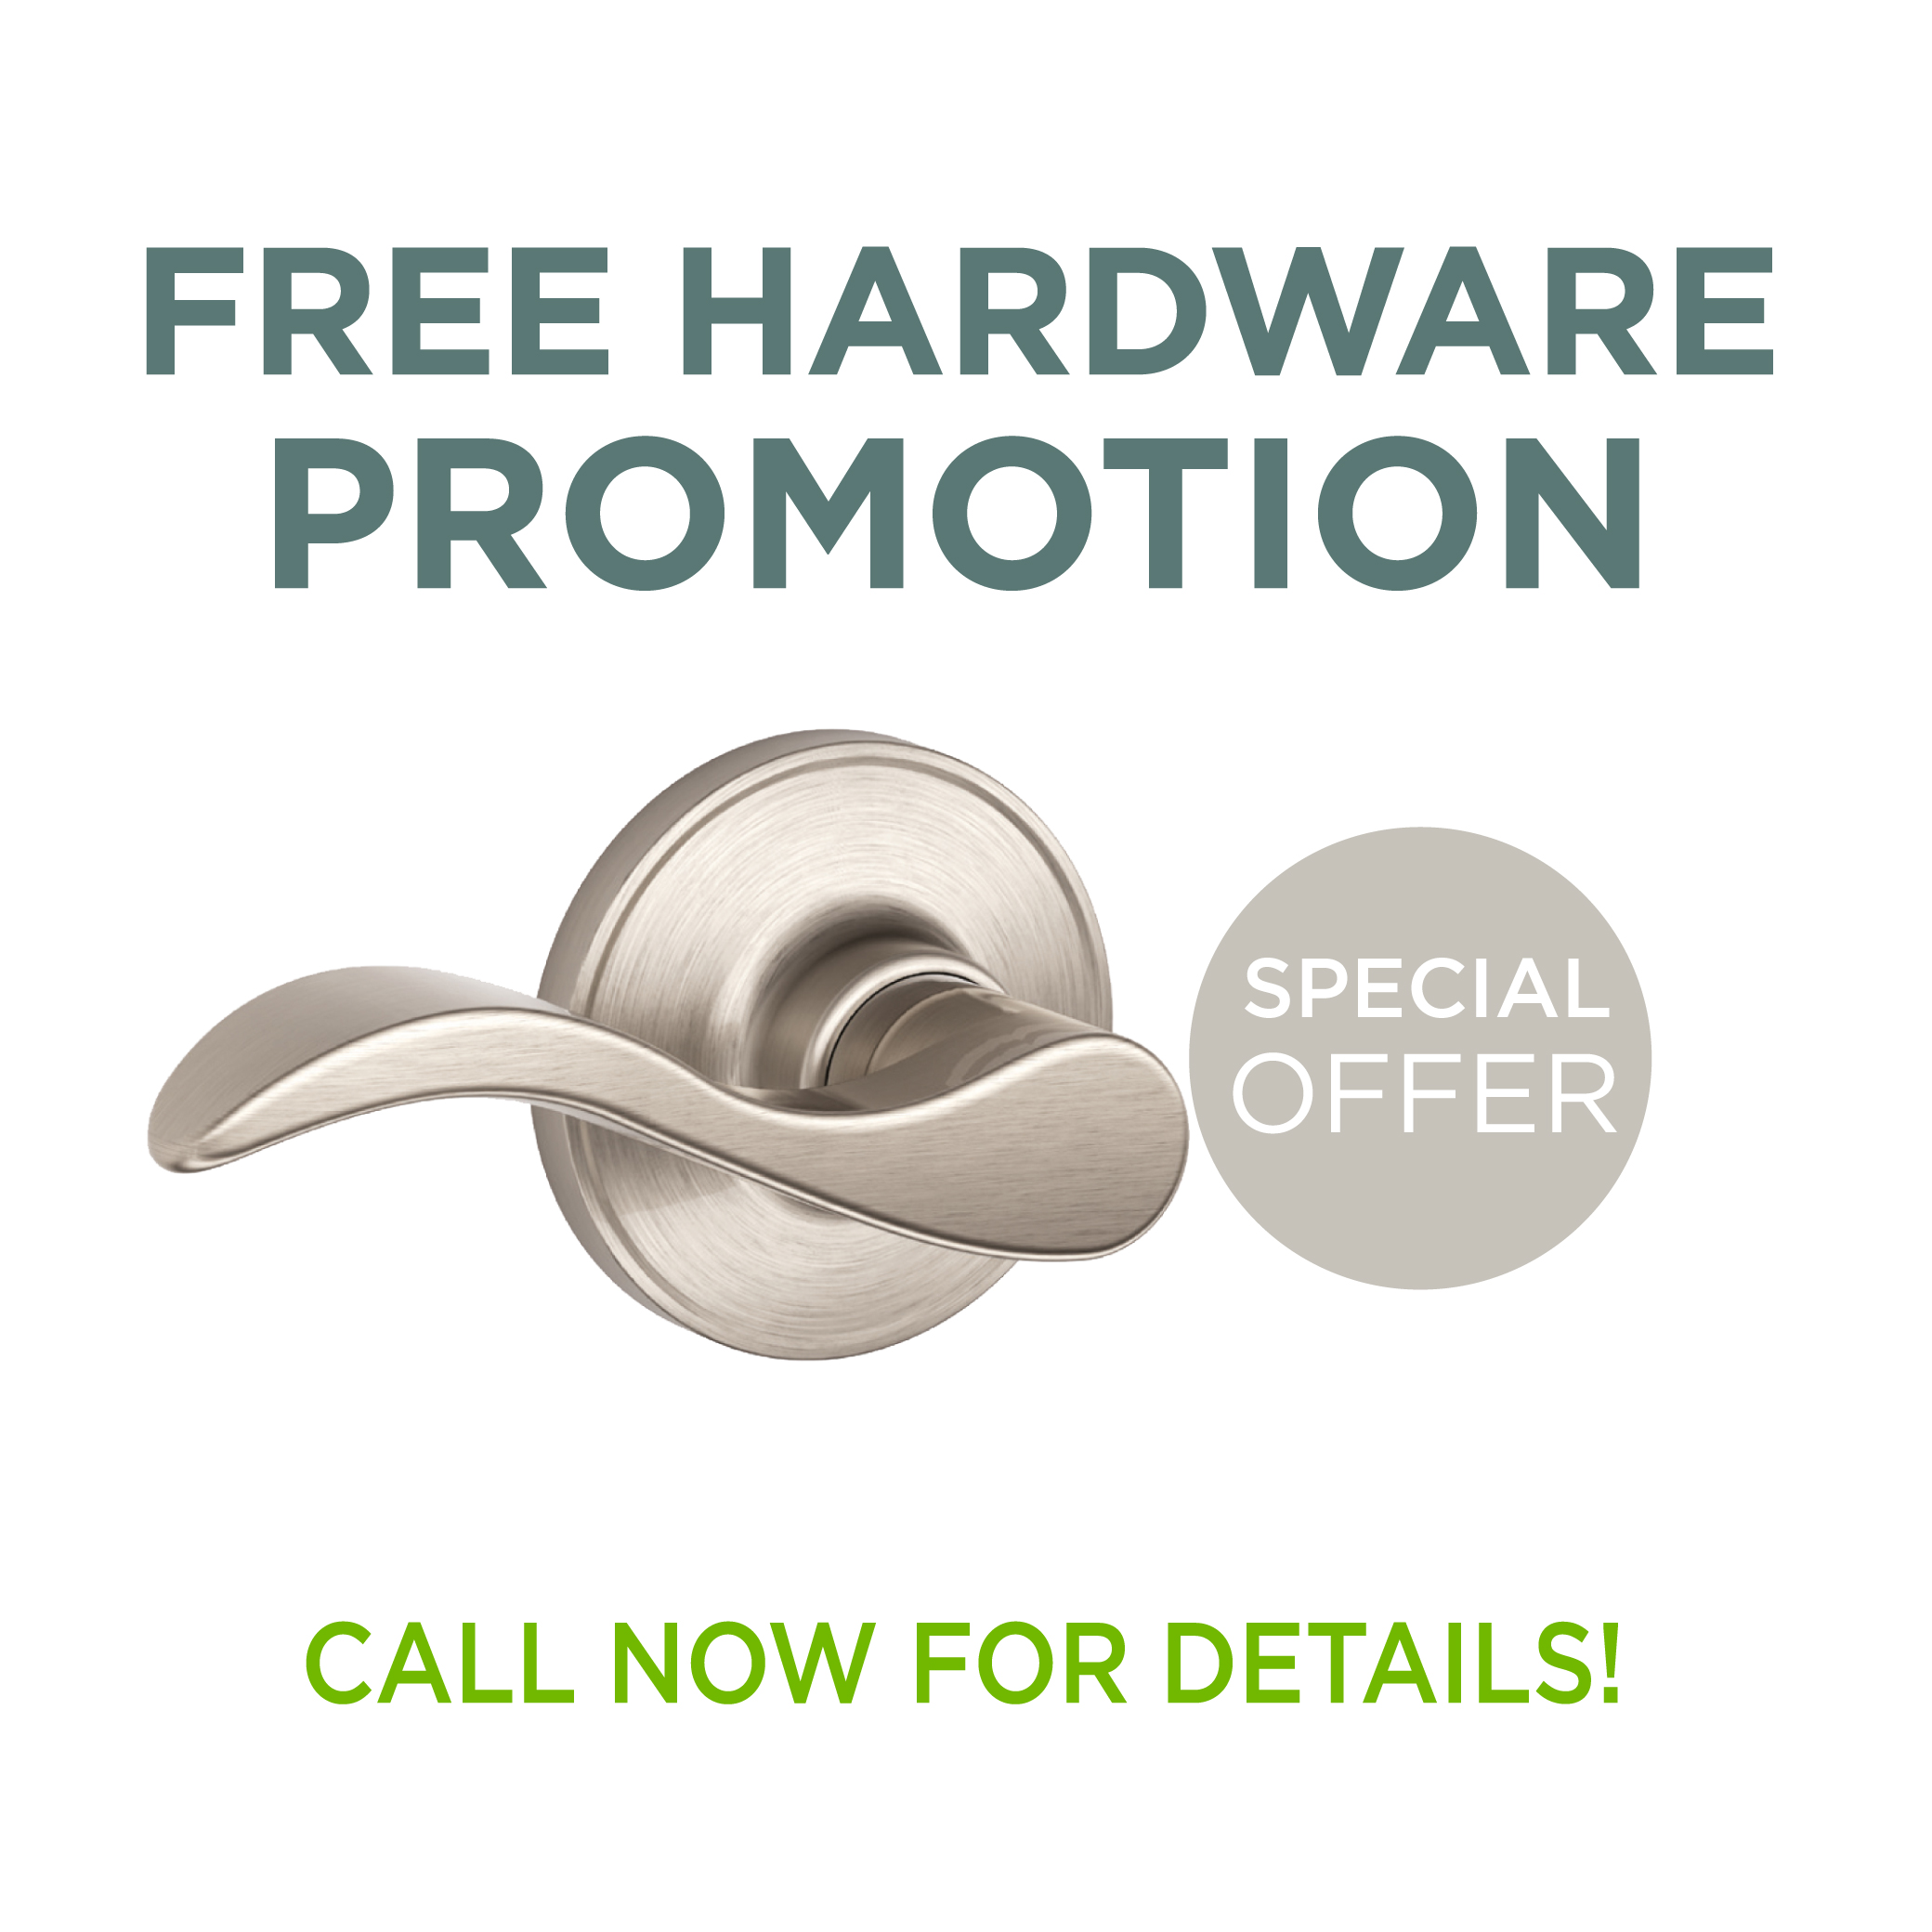 Free hardware promotional offer